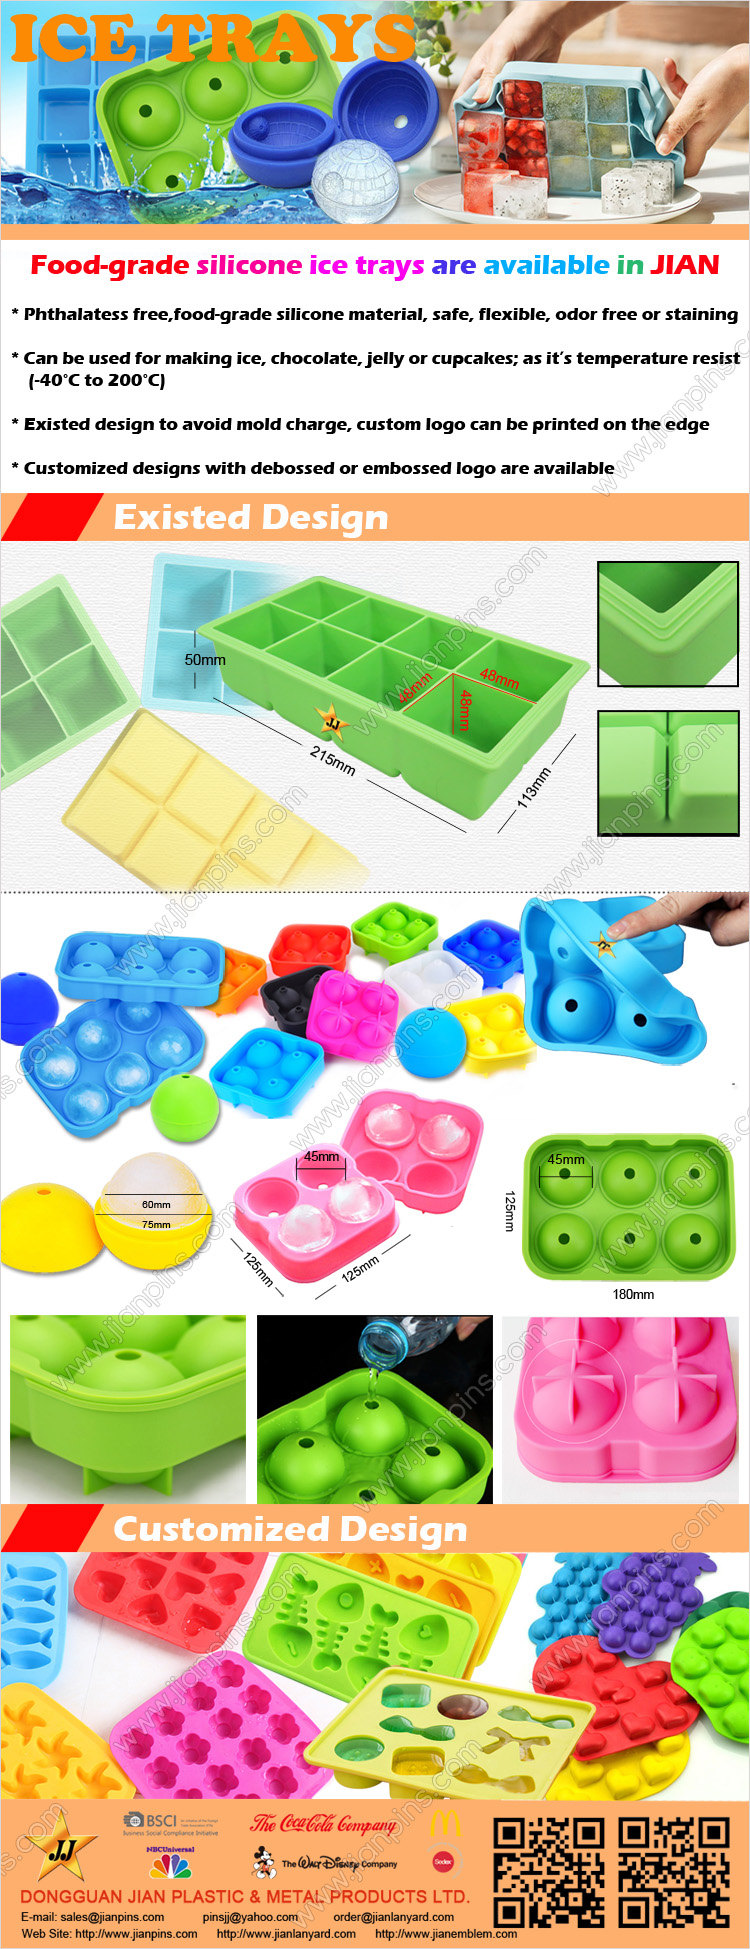 Practical Food-grade Silicone Ice Cube Trays Available in JIAN